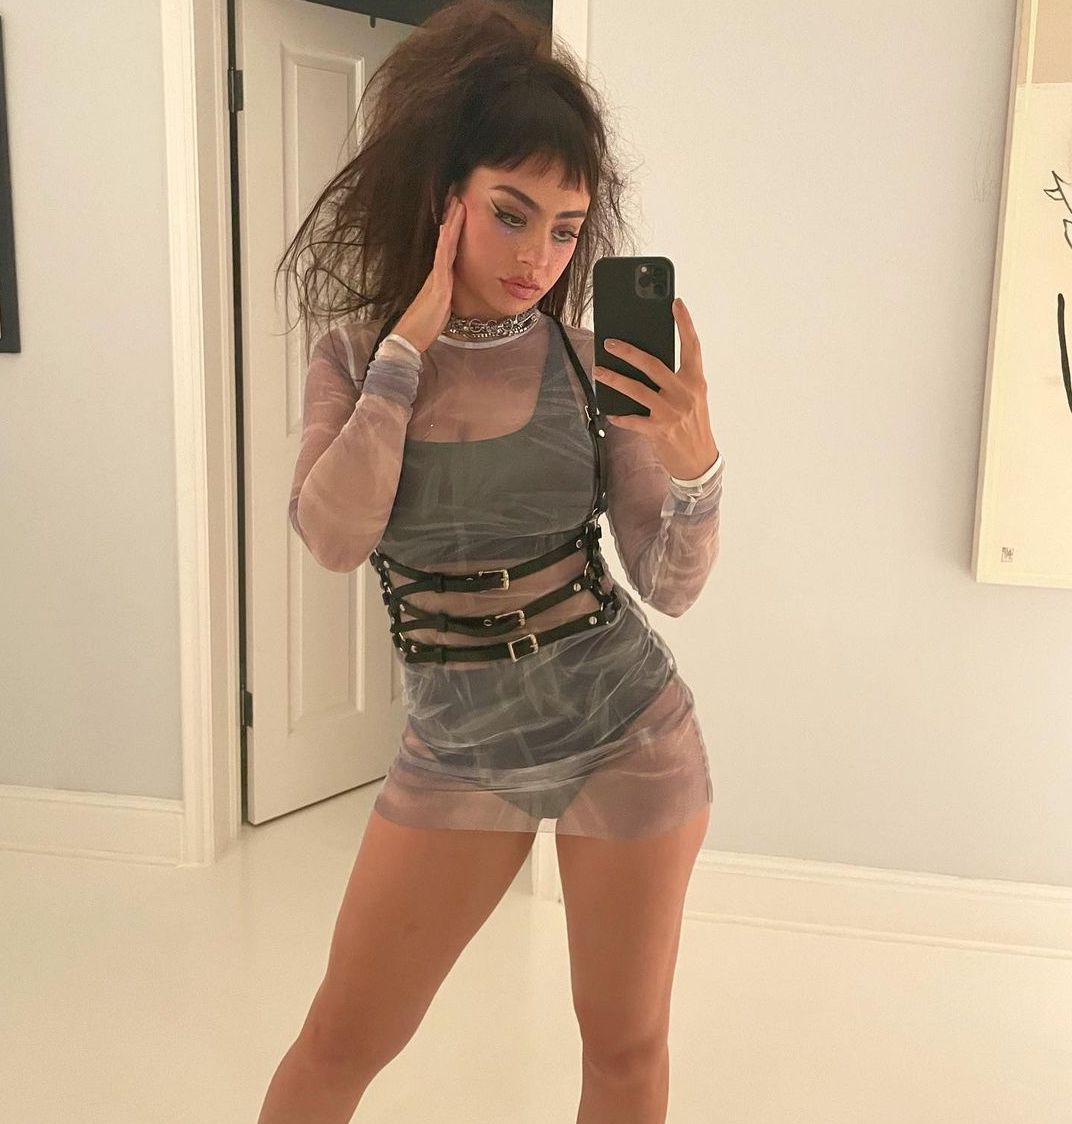 Photos n°63 : Charli XCX Looks Hot In It!